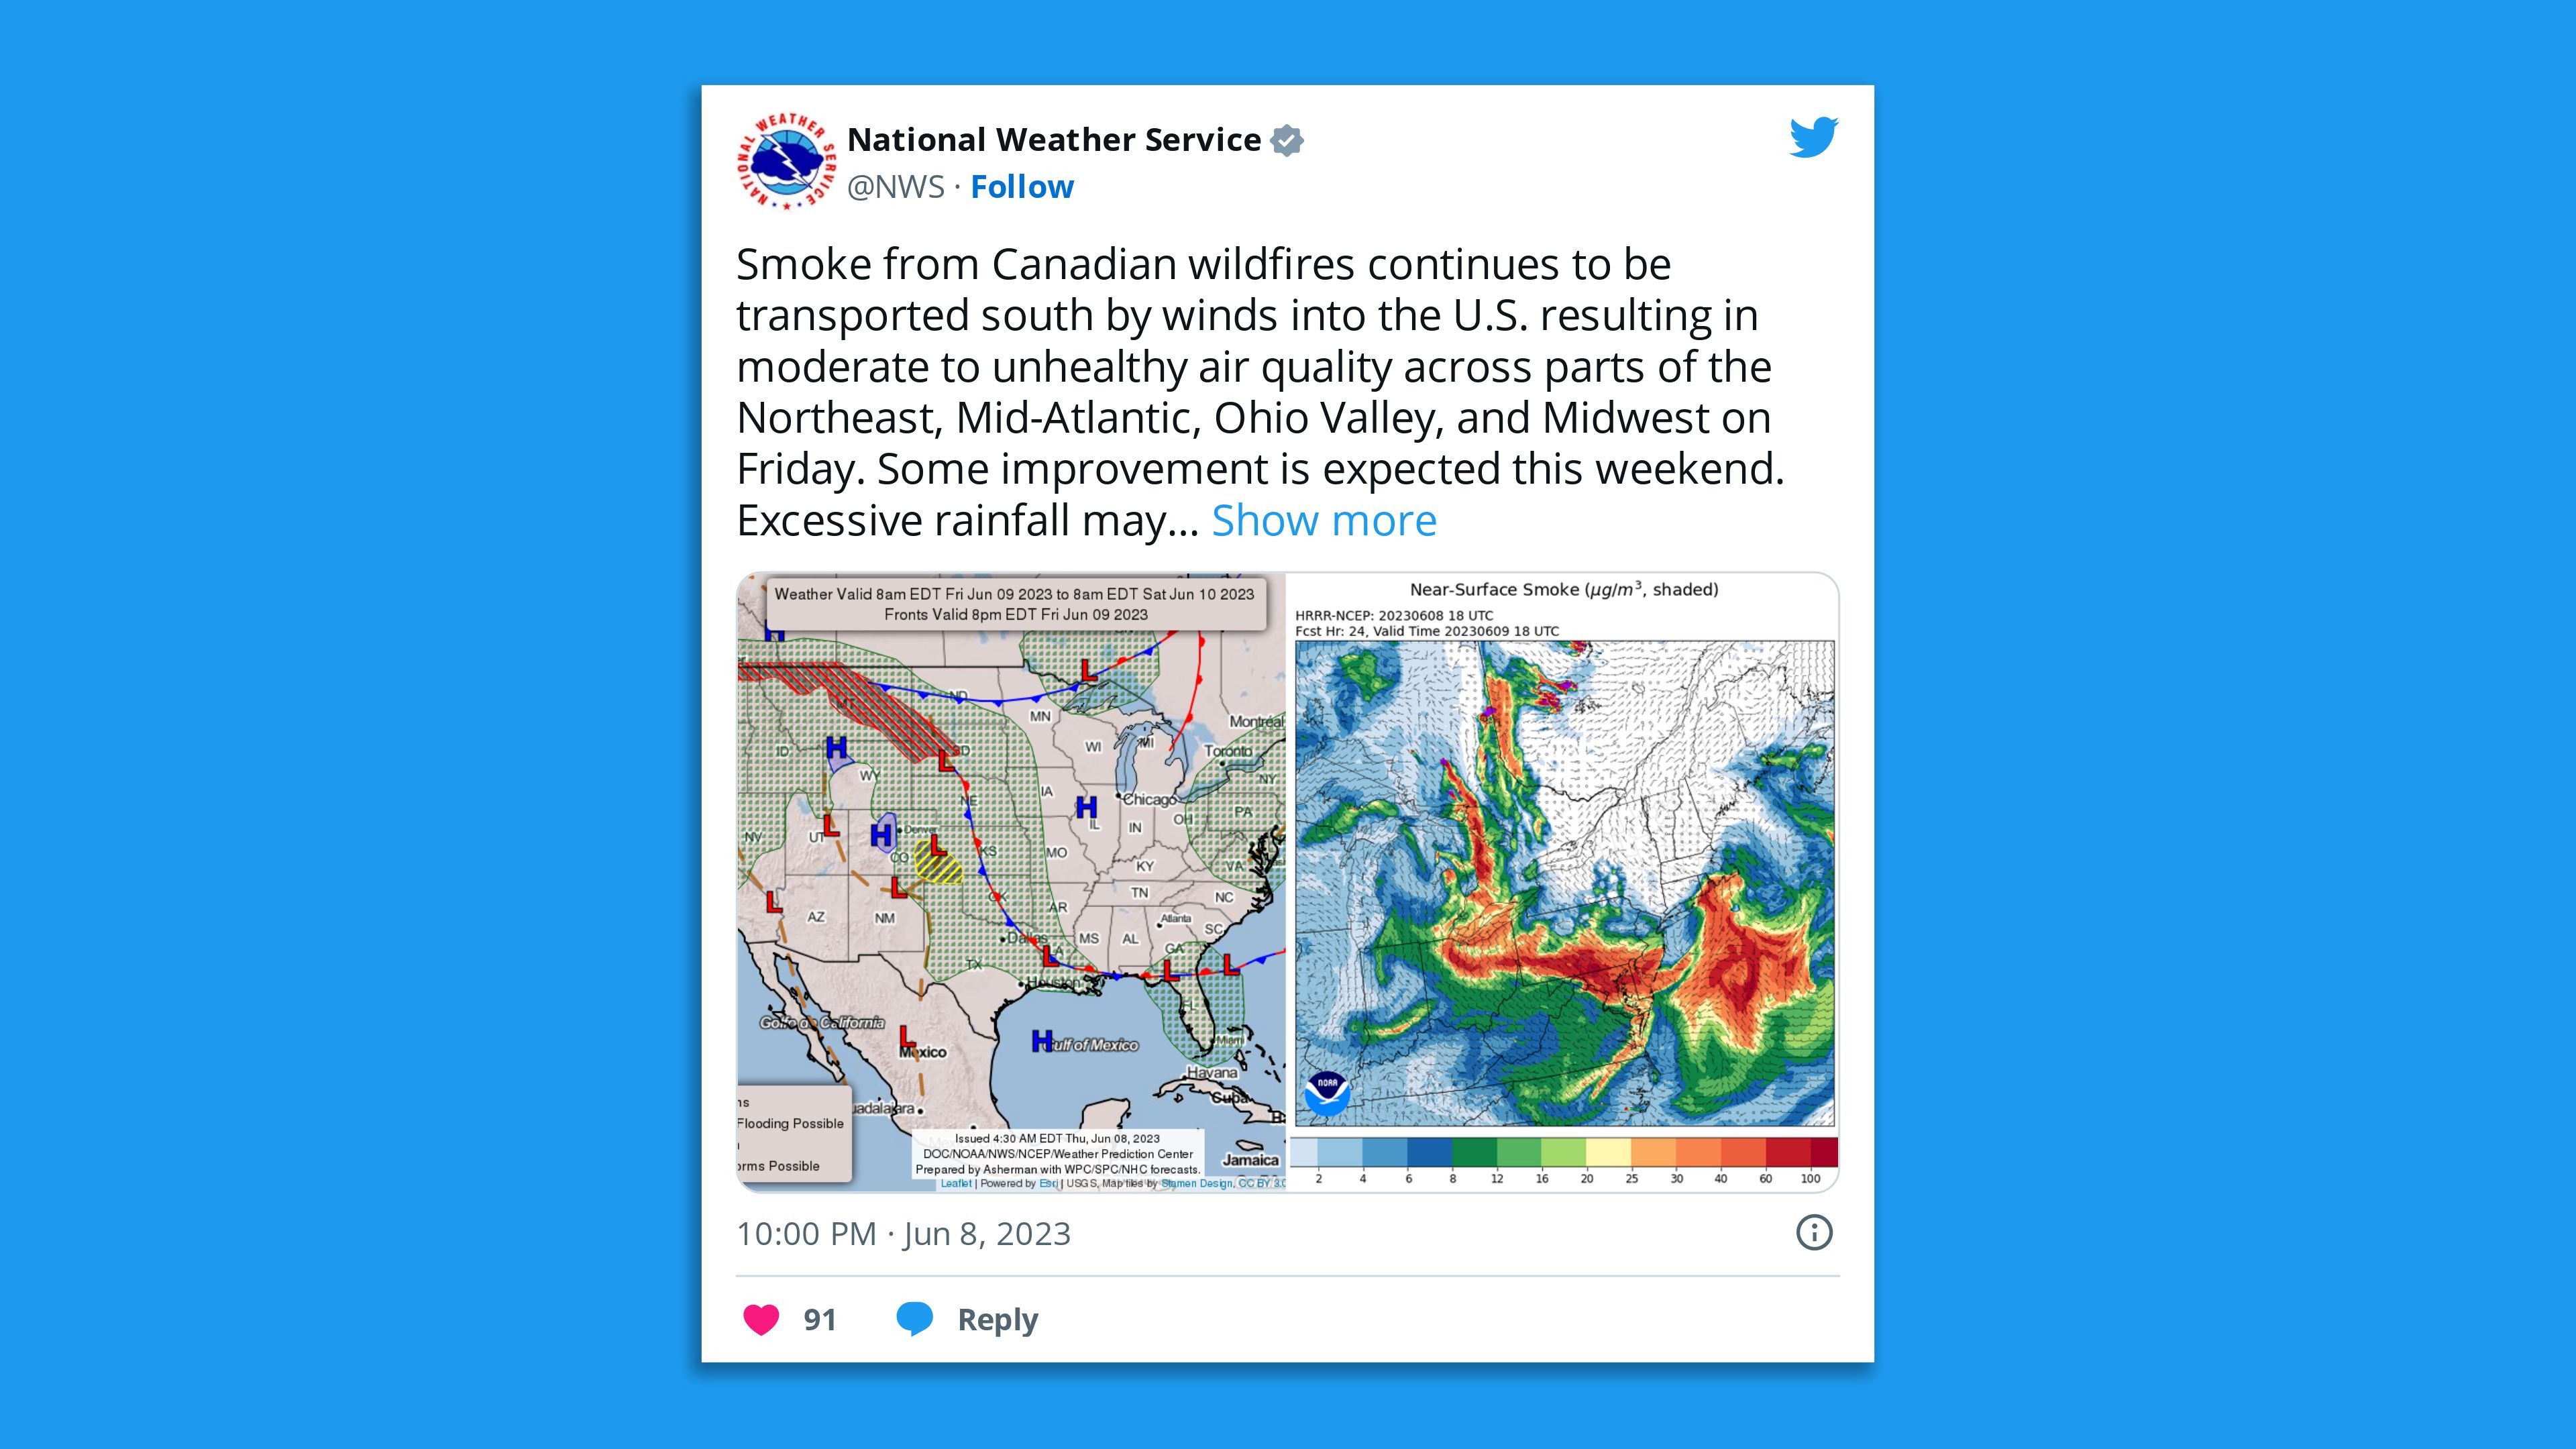 A screenshot of a National Weather Service tweet saying: "Smoke from Canadian wildfires continues to be transported south by winds into the U.S. resulting in moderate to unhealthy air quality across parts of the Northeast, Mid-Atlantic, Ohio Valley, and Midwest on Friday. Some improvement is expected this weekend. "